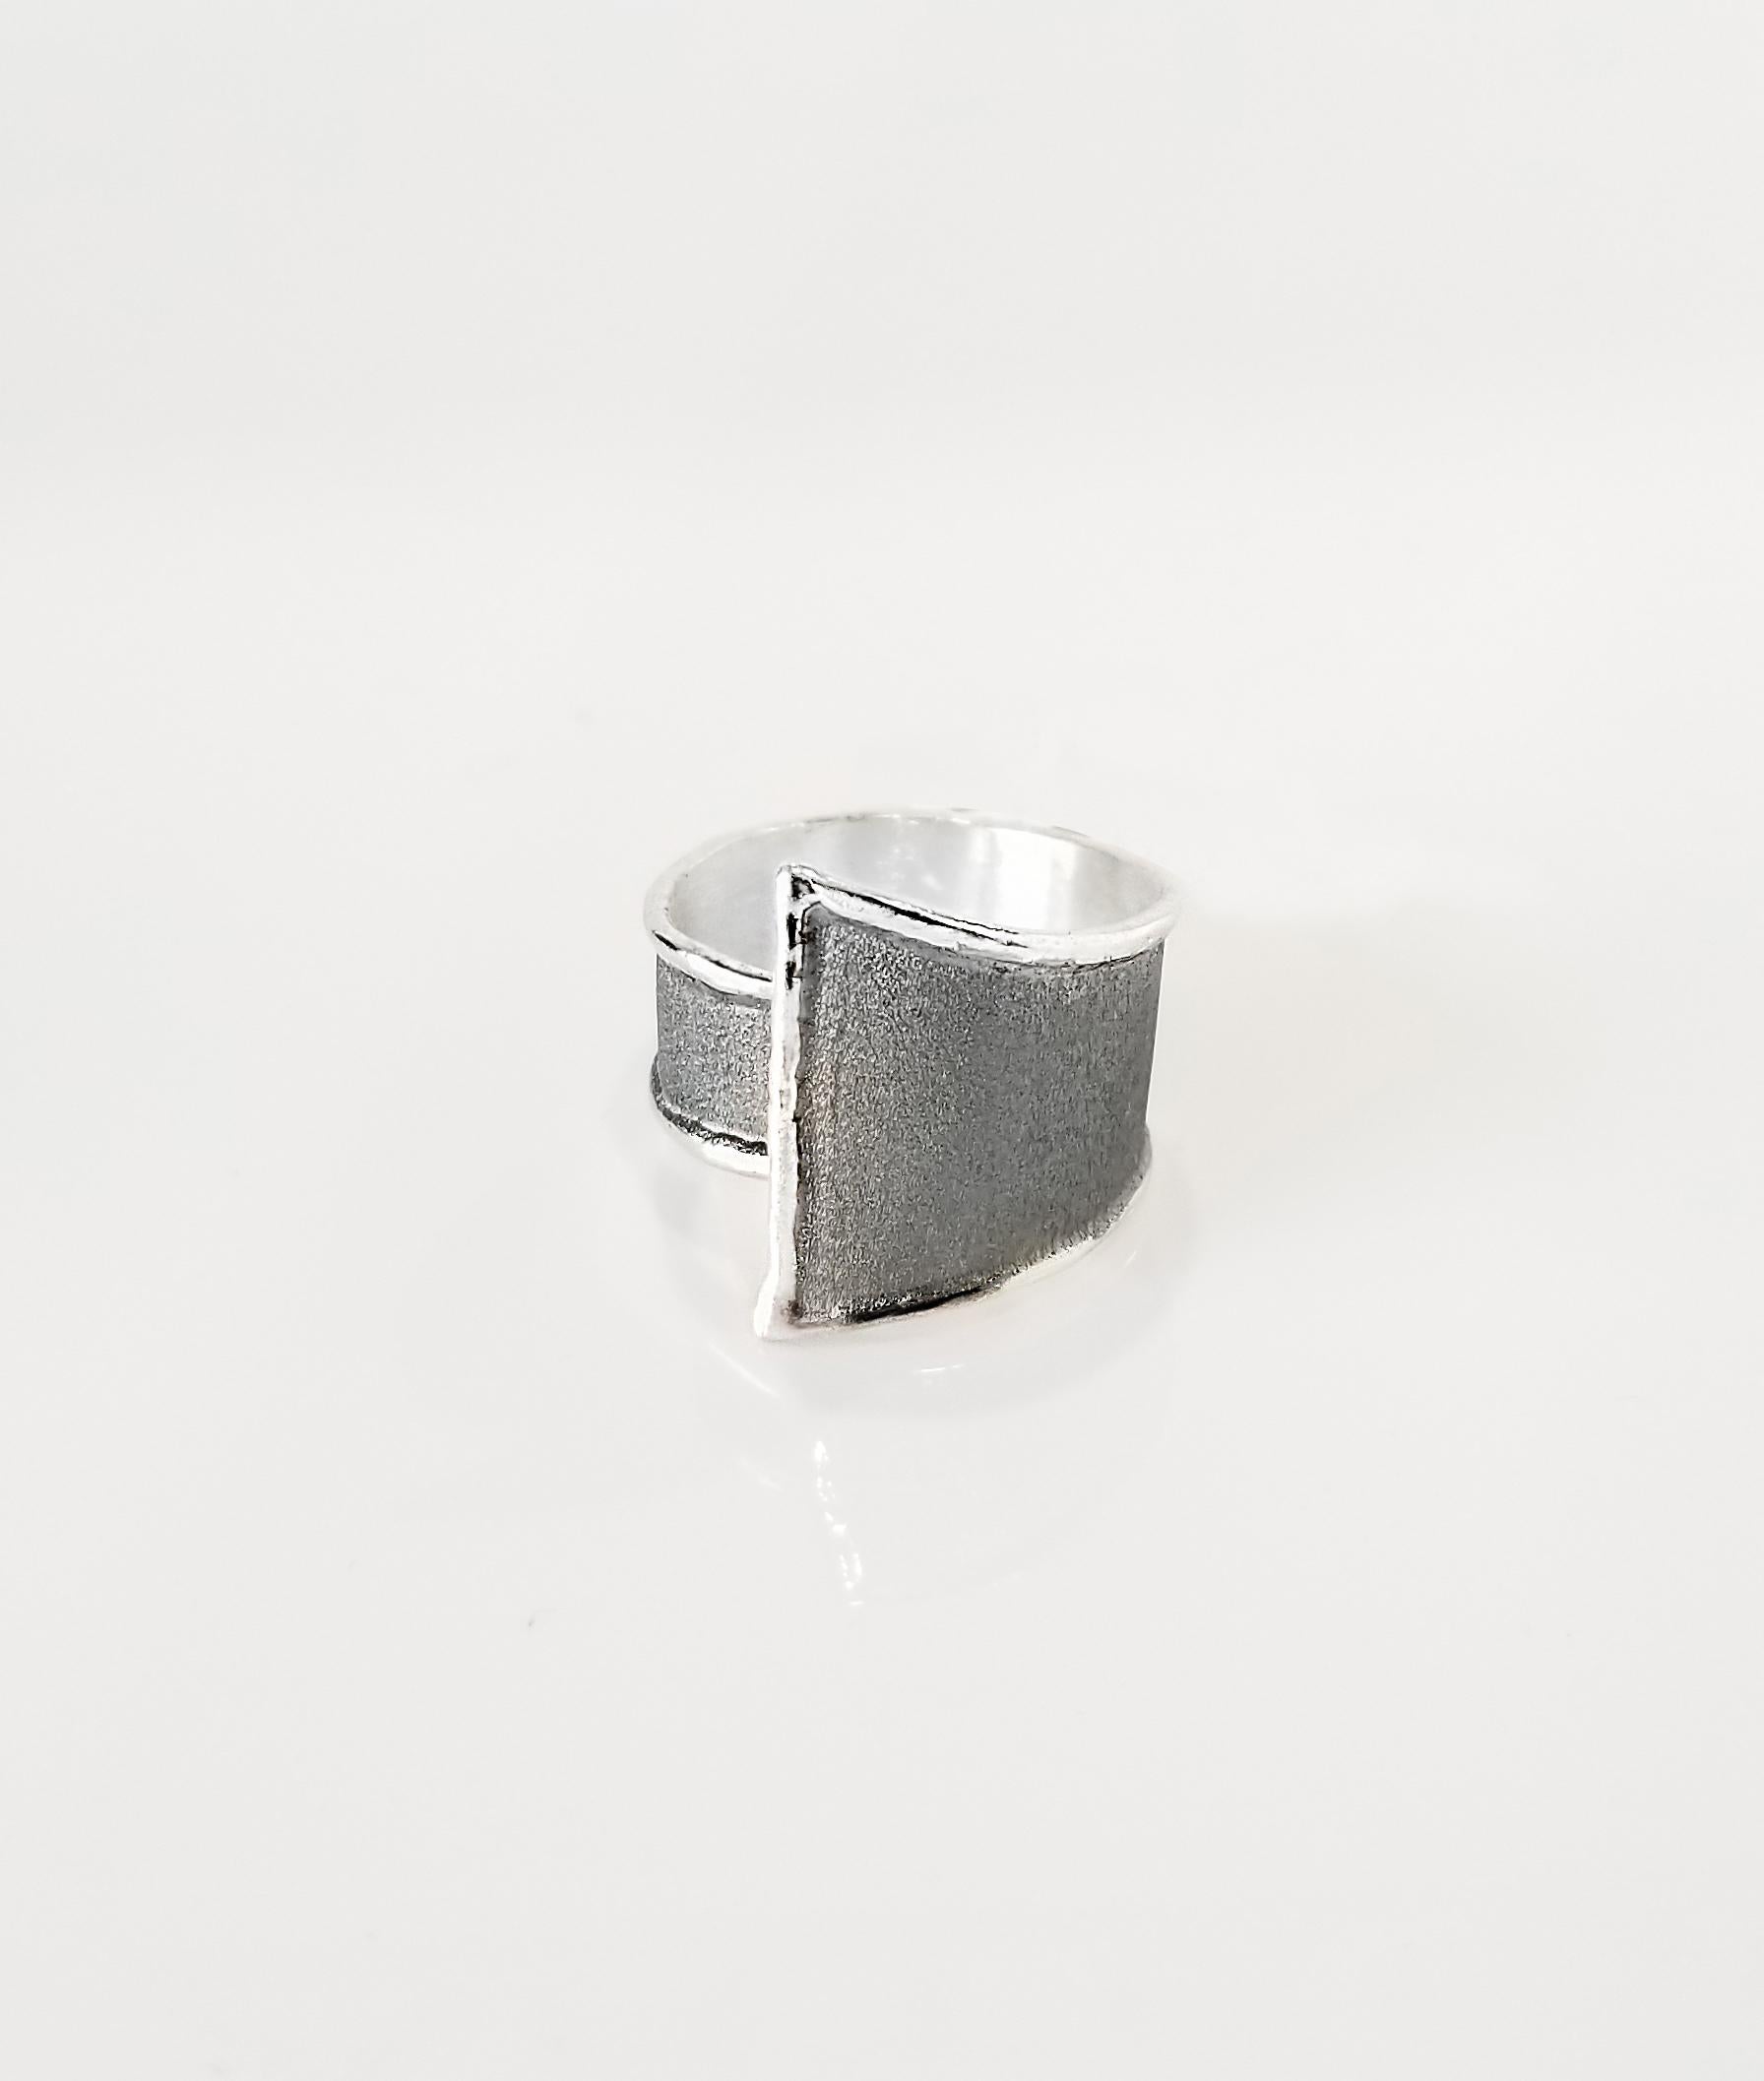 Yianni Creations Hephestos Collection 100% Handmade Artisan Ring from Fine Silver. The ring features a unique oxidized Rhodium finish complemented by unique techniques of craftsmanship - brushed texture and nature-inspired liquid edges. The core of